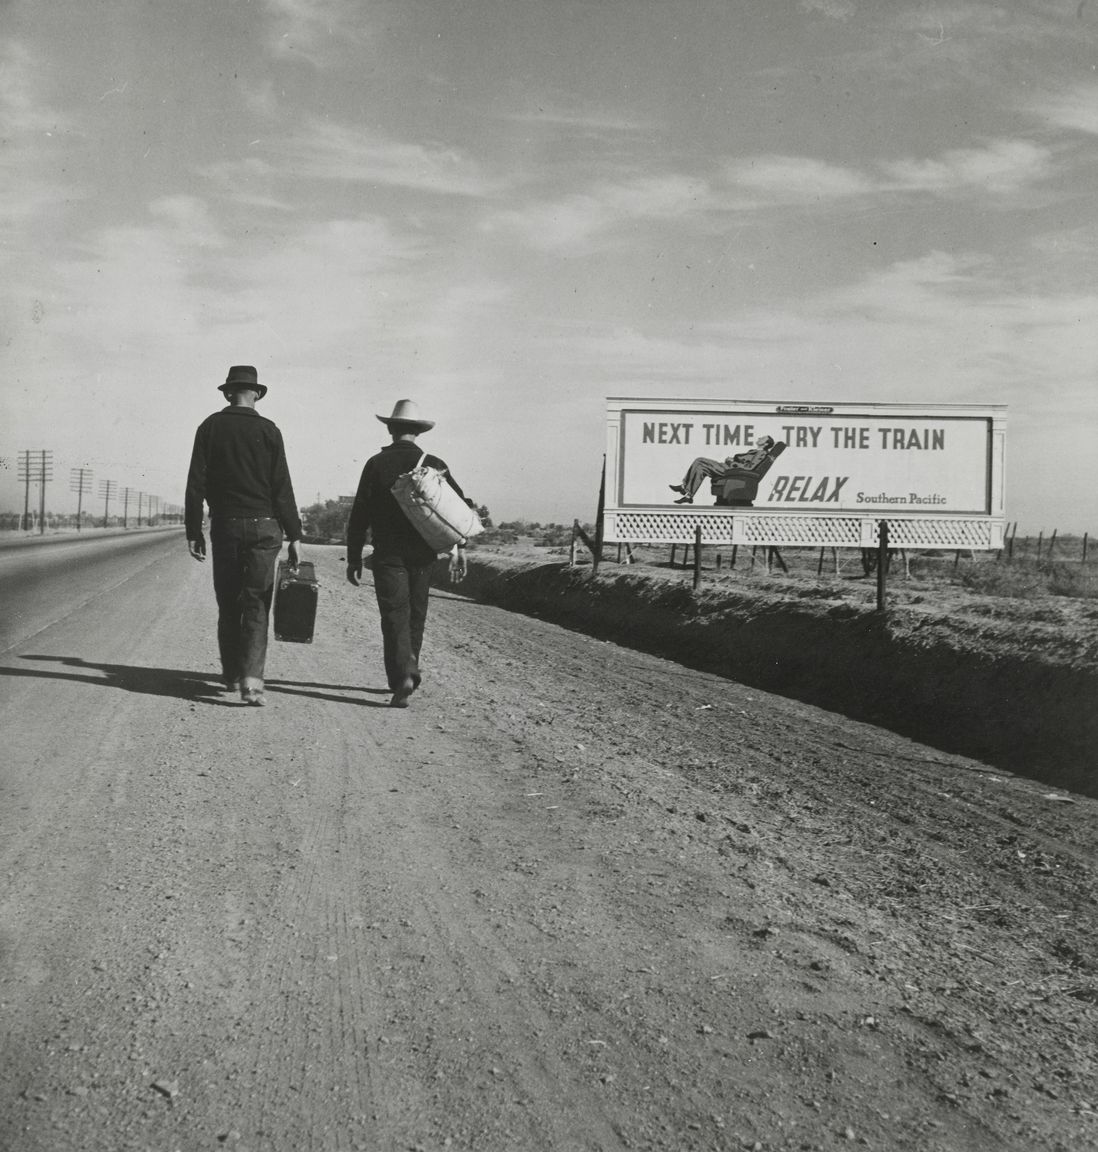 Dorothea Lange. On the Road to Los Angeles, California. 1937.  (The Museum of Modern Art, New York)